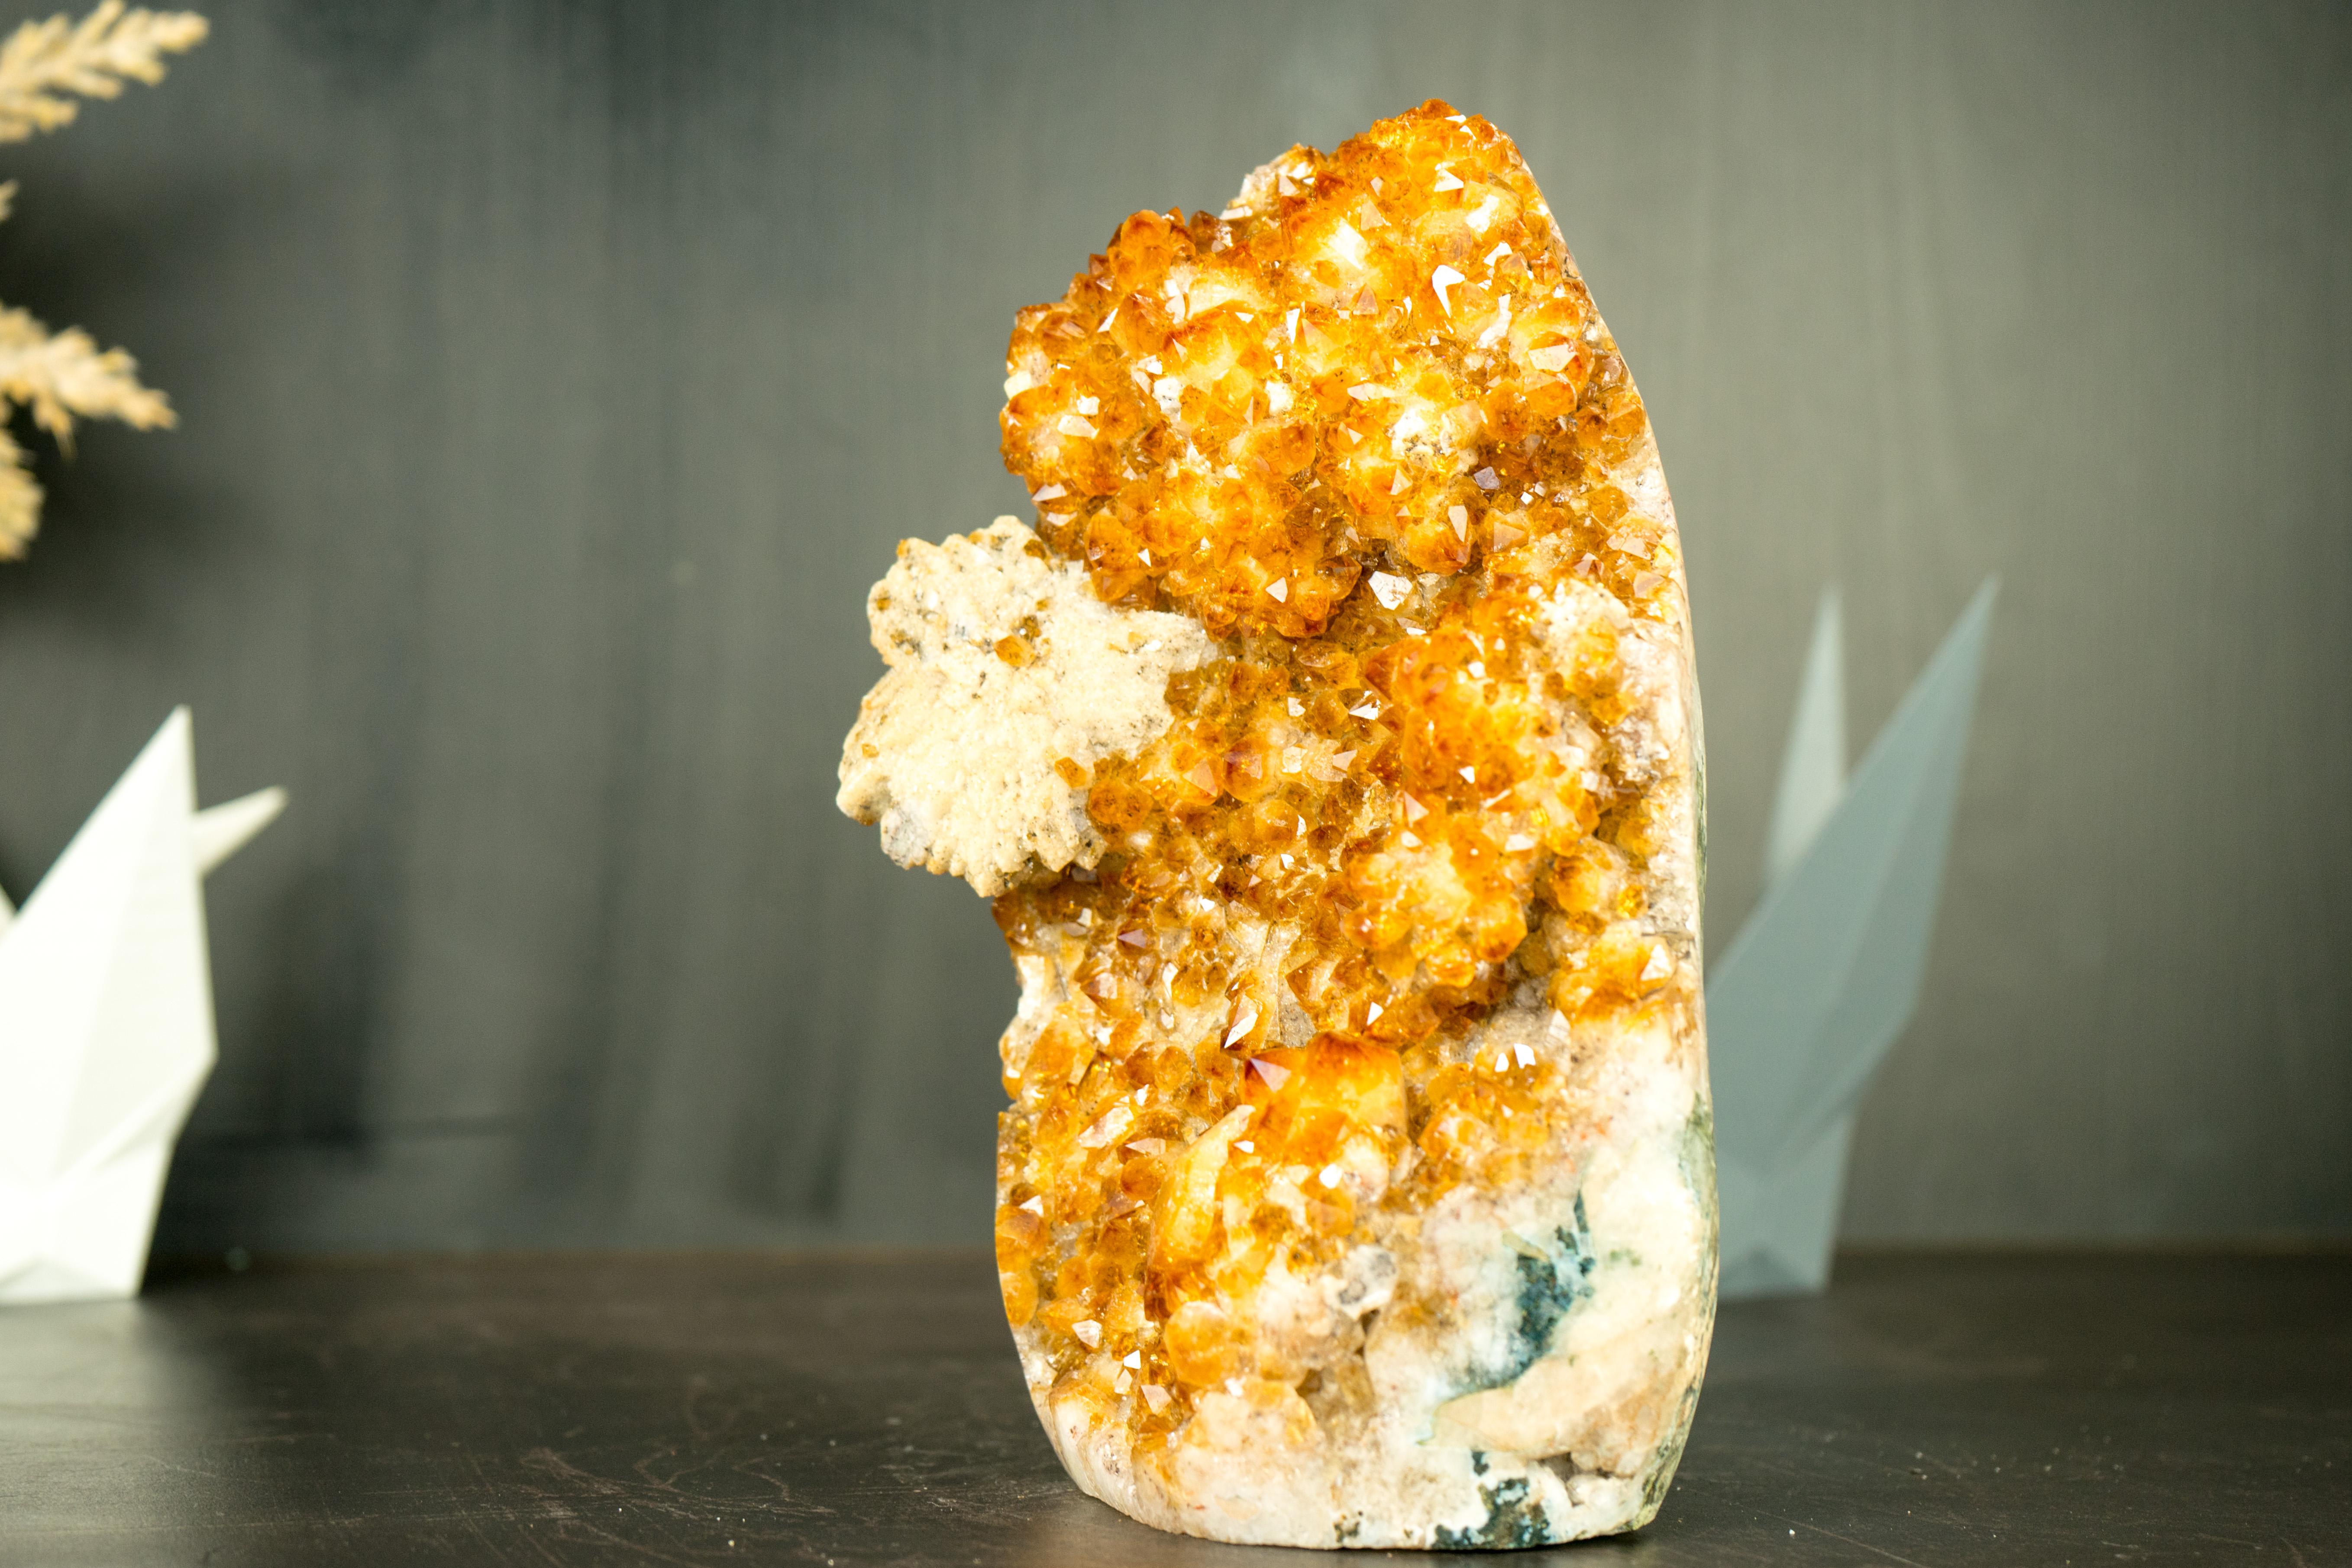 Agate High-Grade Citrine Cluster with Rich Amber Citrine Color and Flower Calcite For Sale